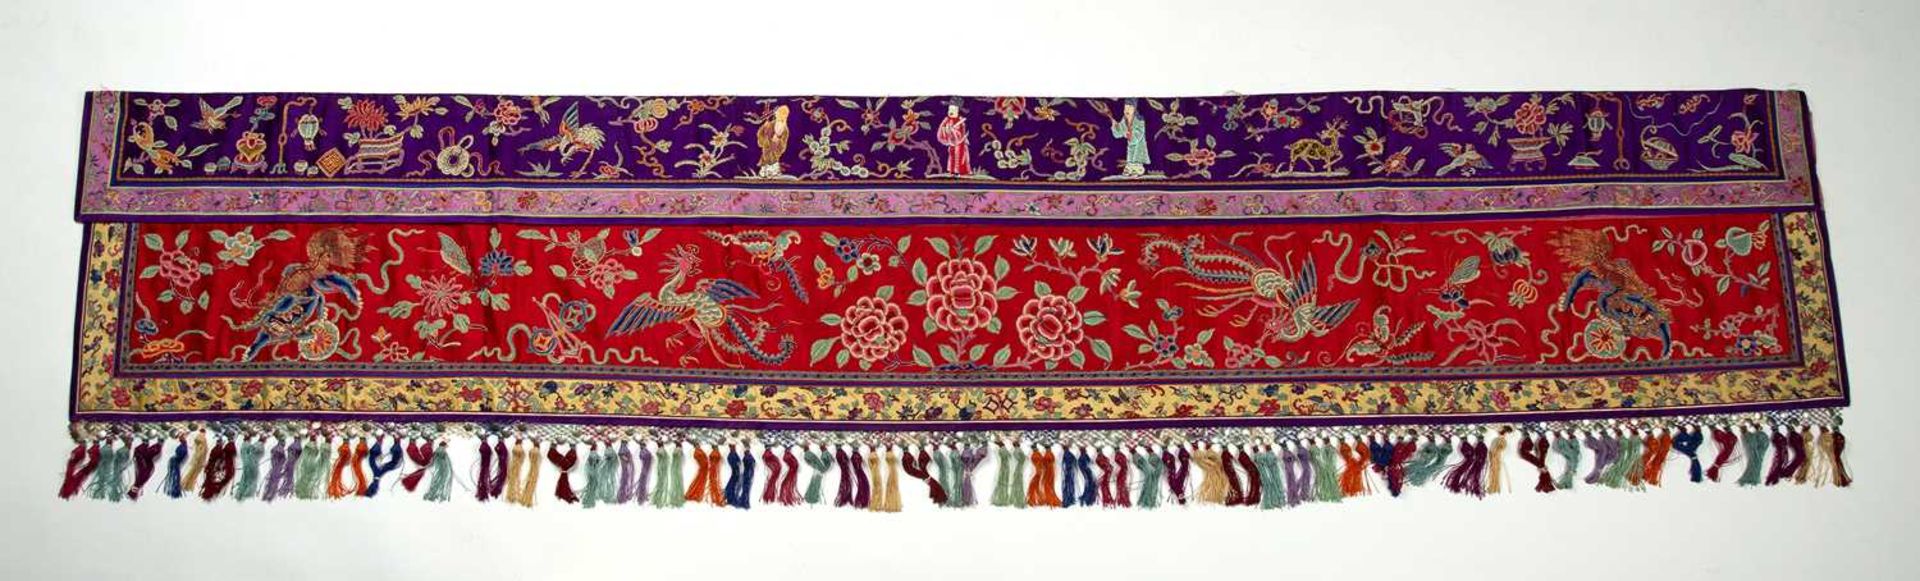 Purple and red silk altar panel Chinese with phoenixes, immortals, and other auspicious symbols,